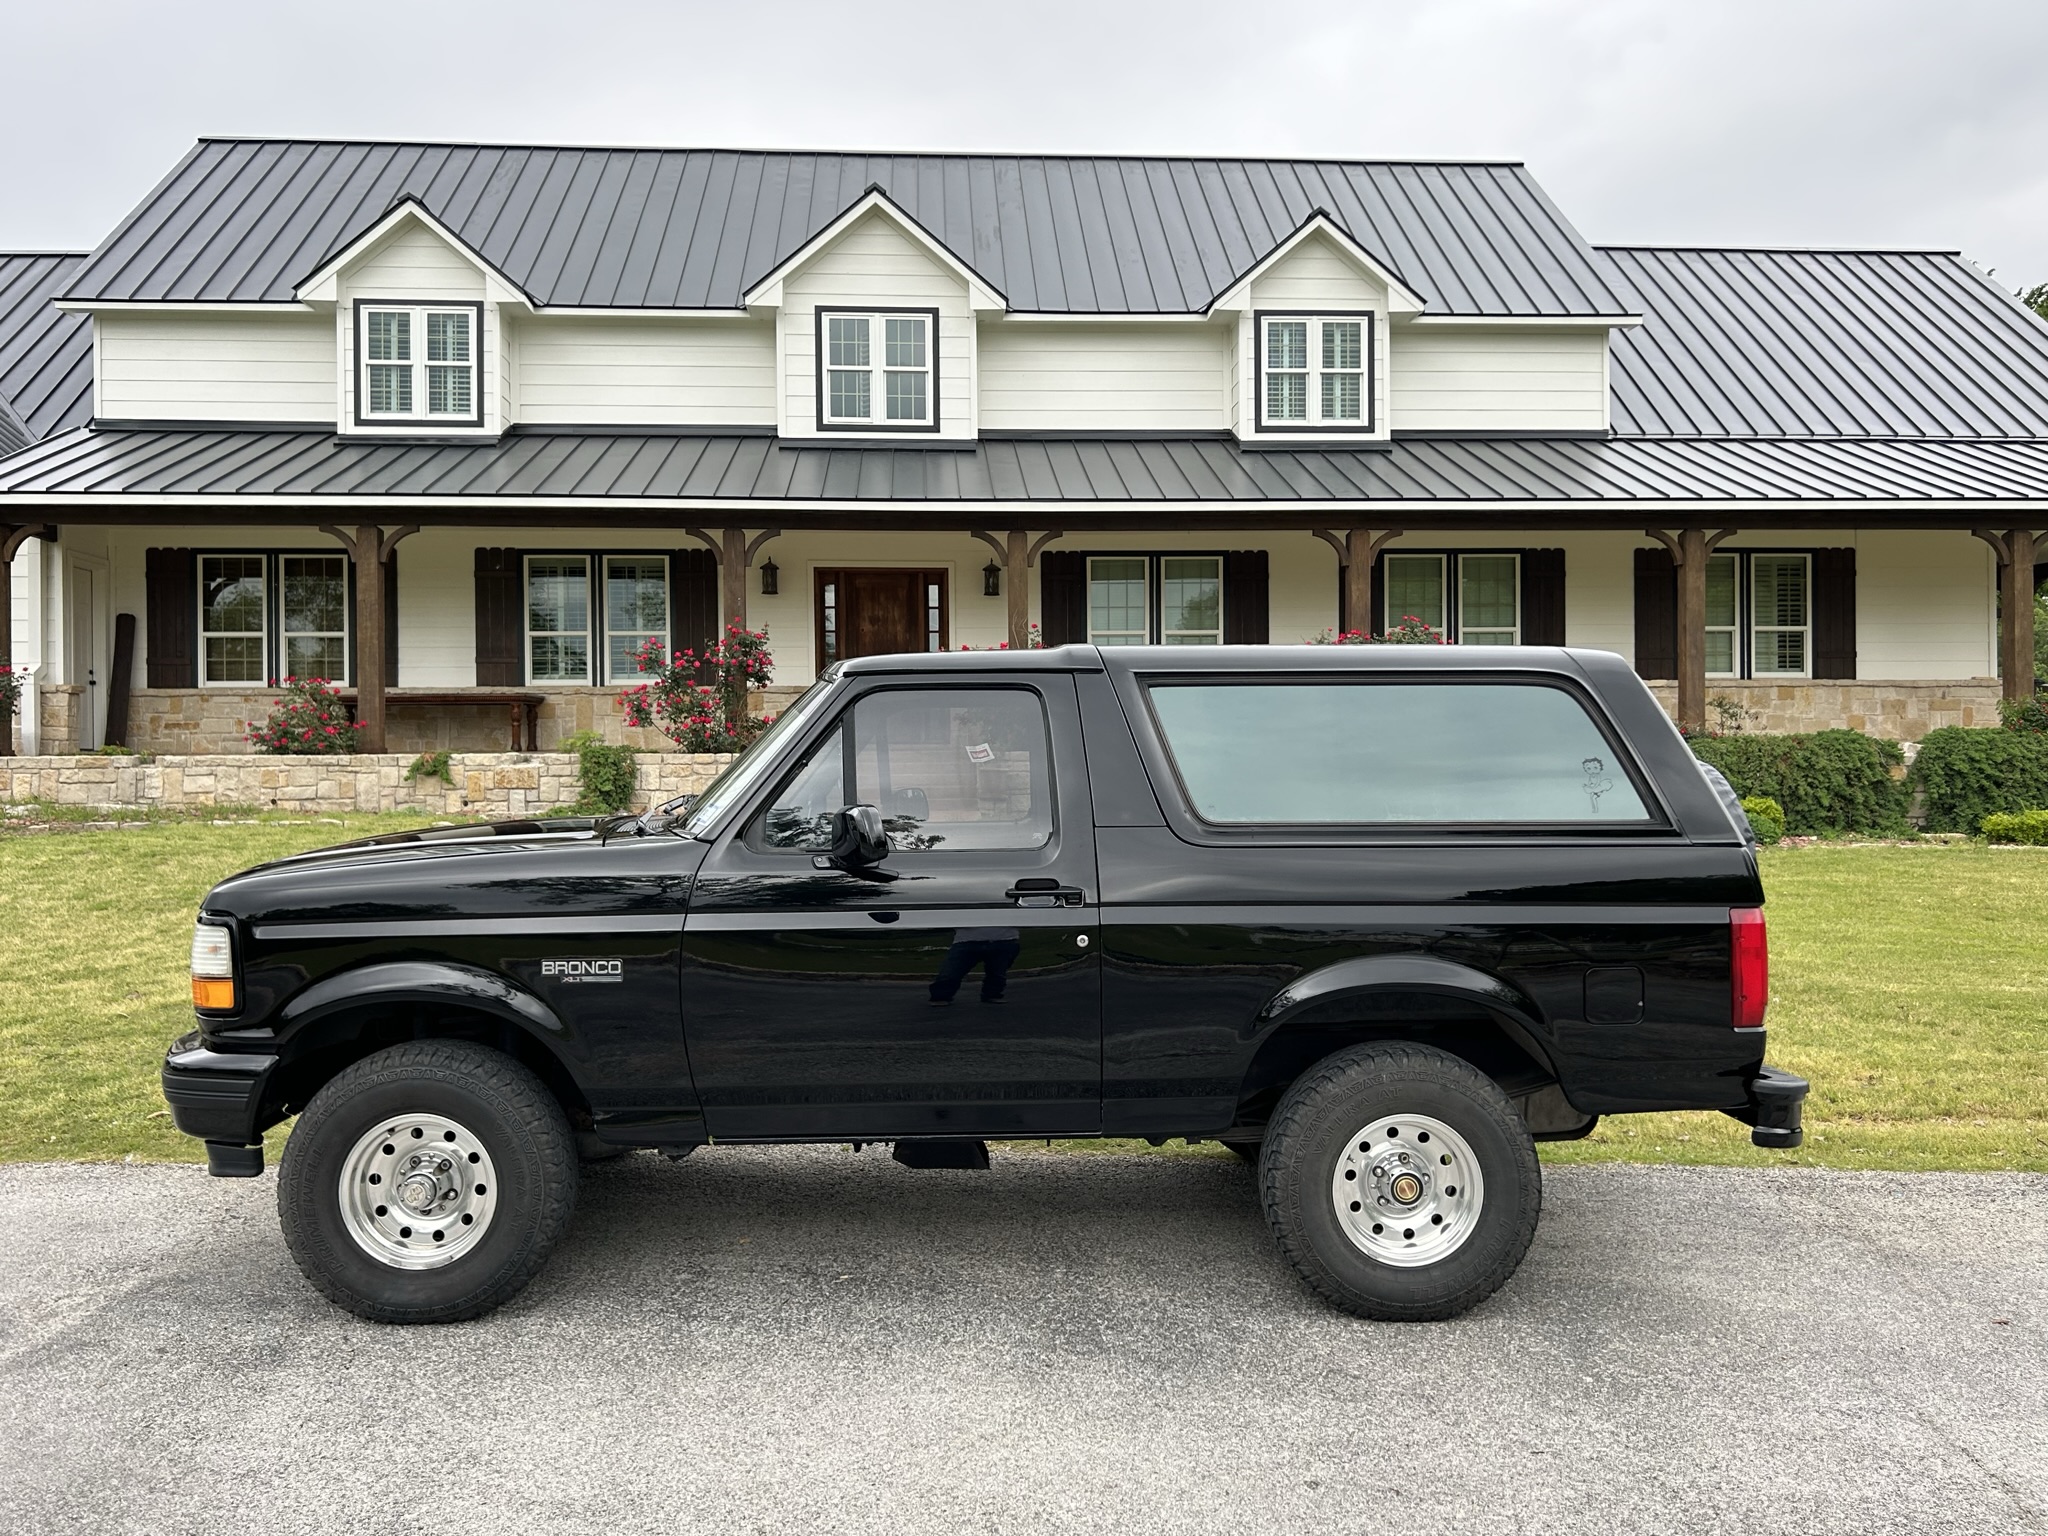 Used 1994 Ford Bronco XL - SEE VIDEO For Sale (Sold)